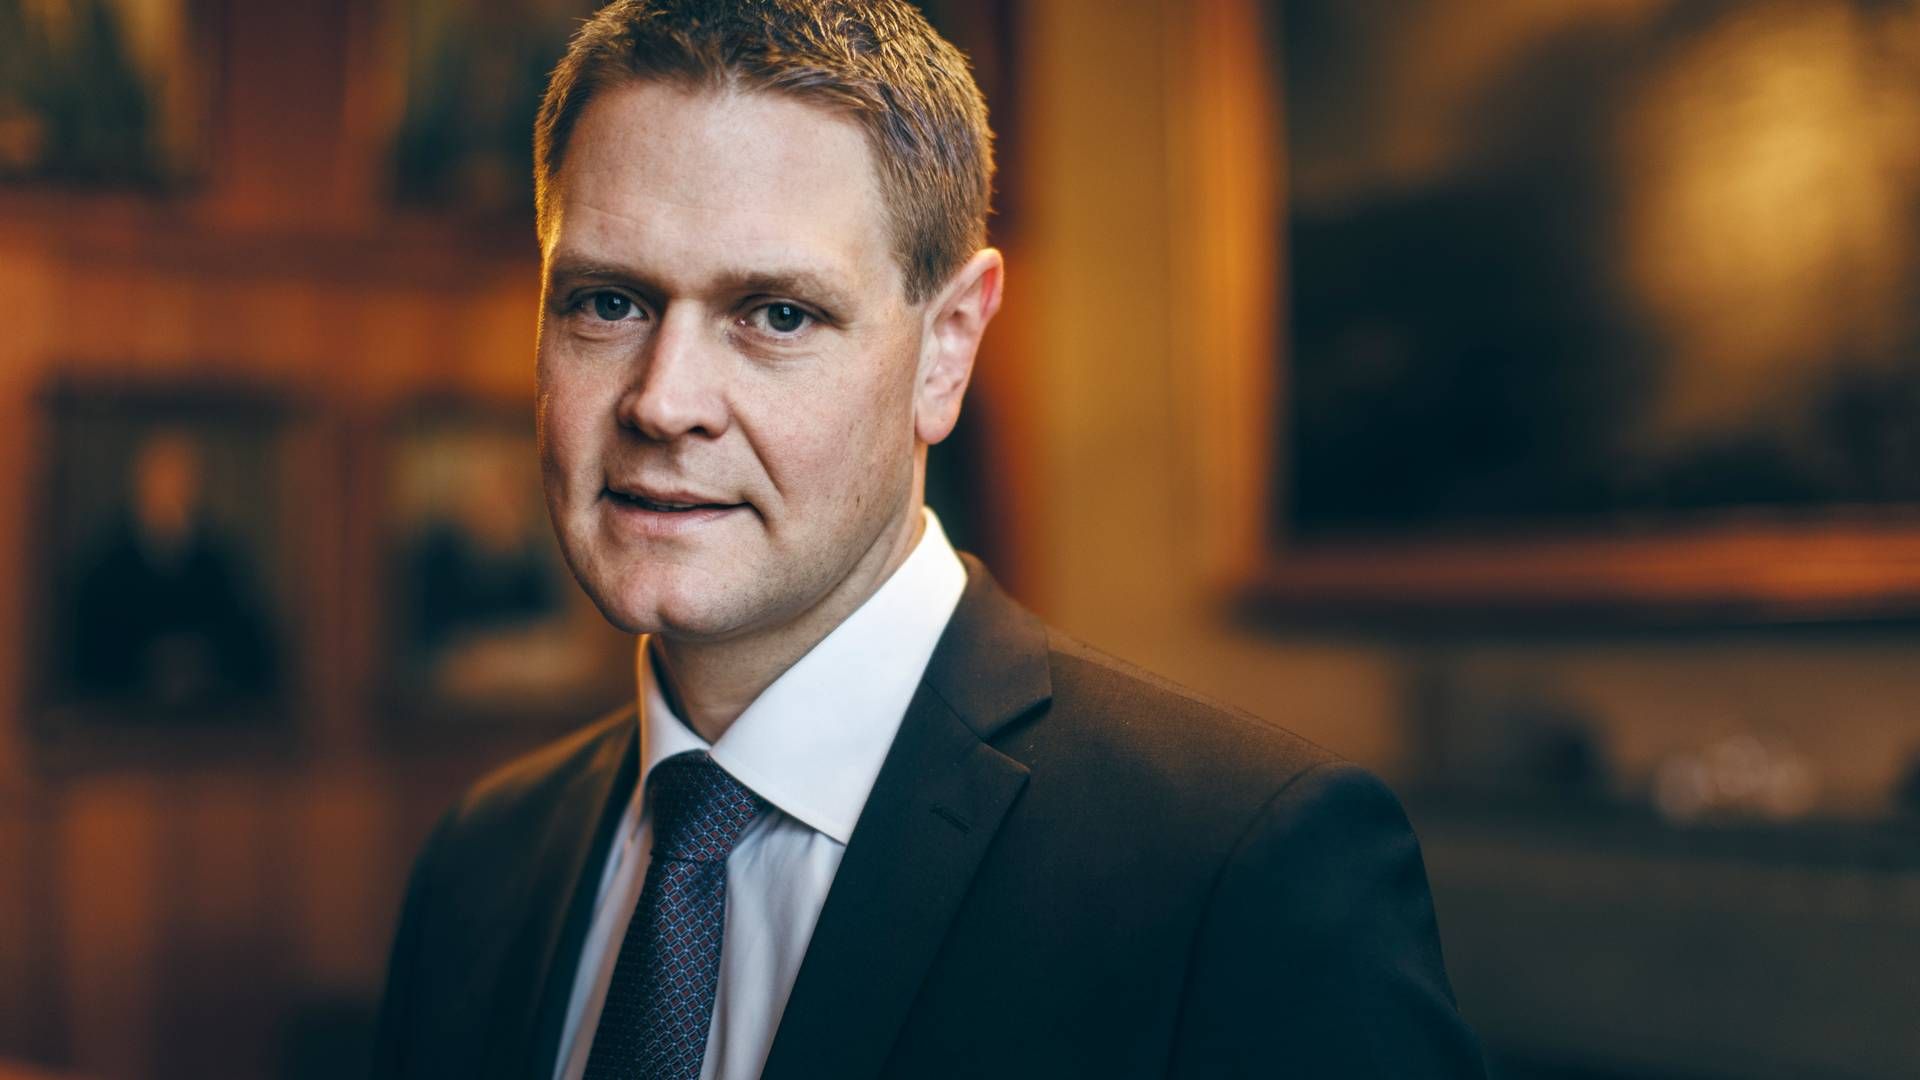 Harald Solberg is CEO of the Norwegian Shipowners' Association. He wants Norway to join a maritime security operation in the Red Sea. | Photo: Norges Rederiforbund